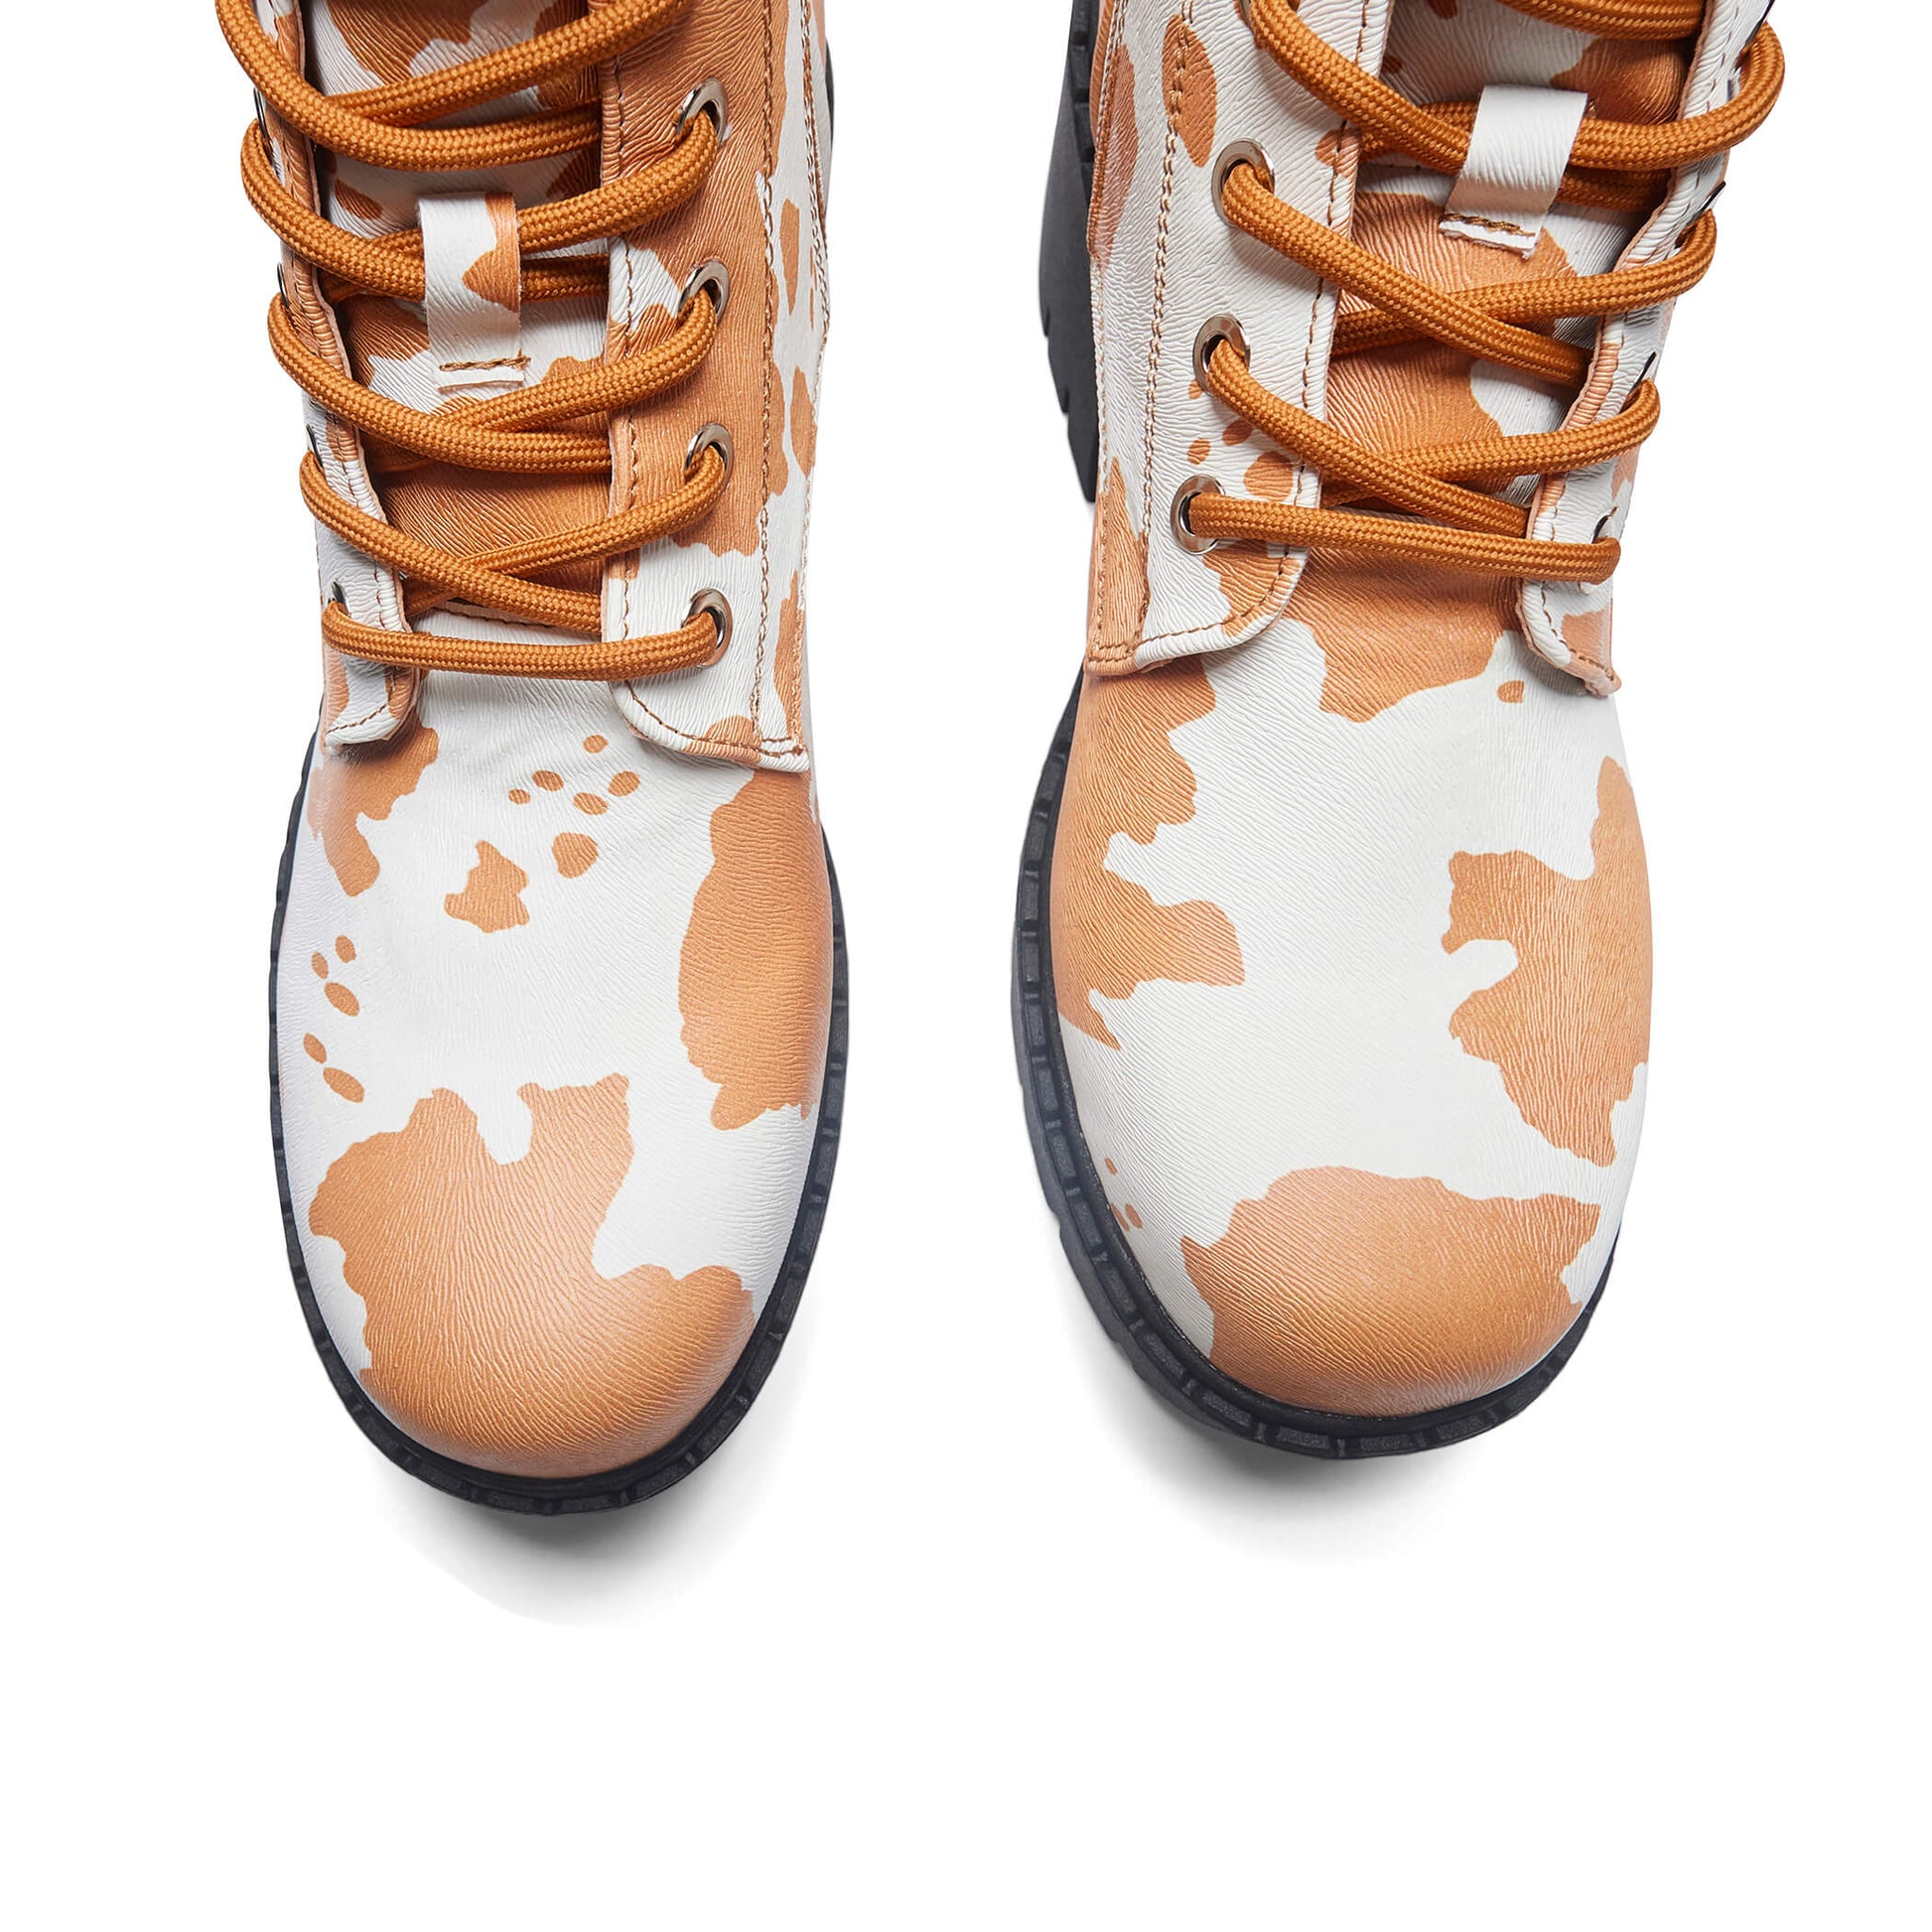 Clarabelle Brown Cow Print Switch Lace Up Boots - Ankle Boots - KOI Footwear - Black - Top View